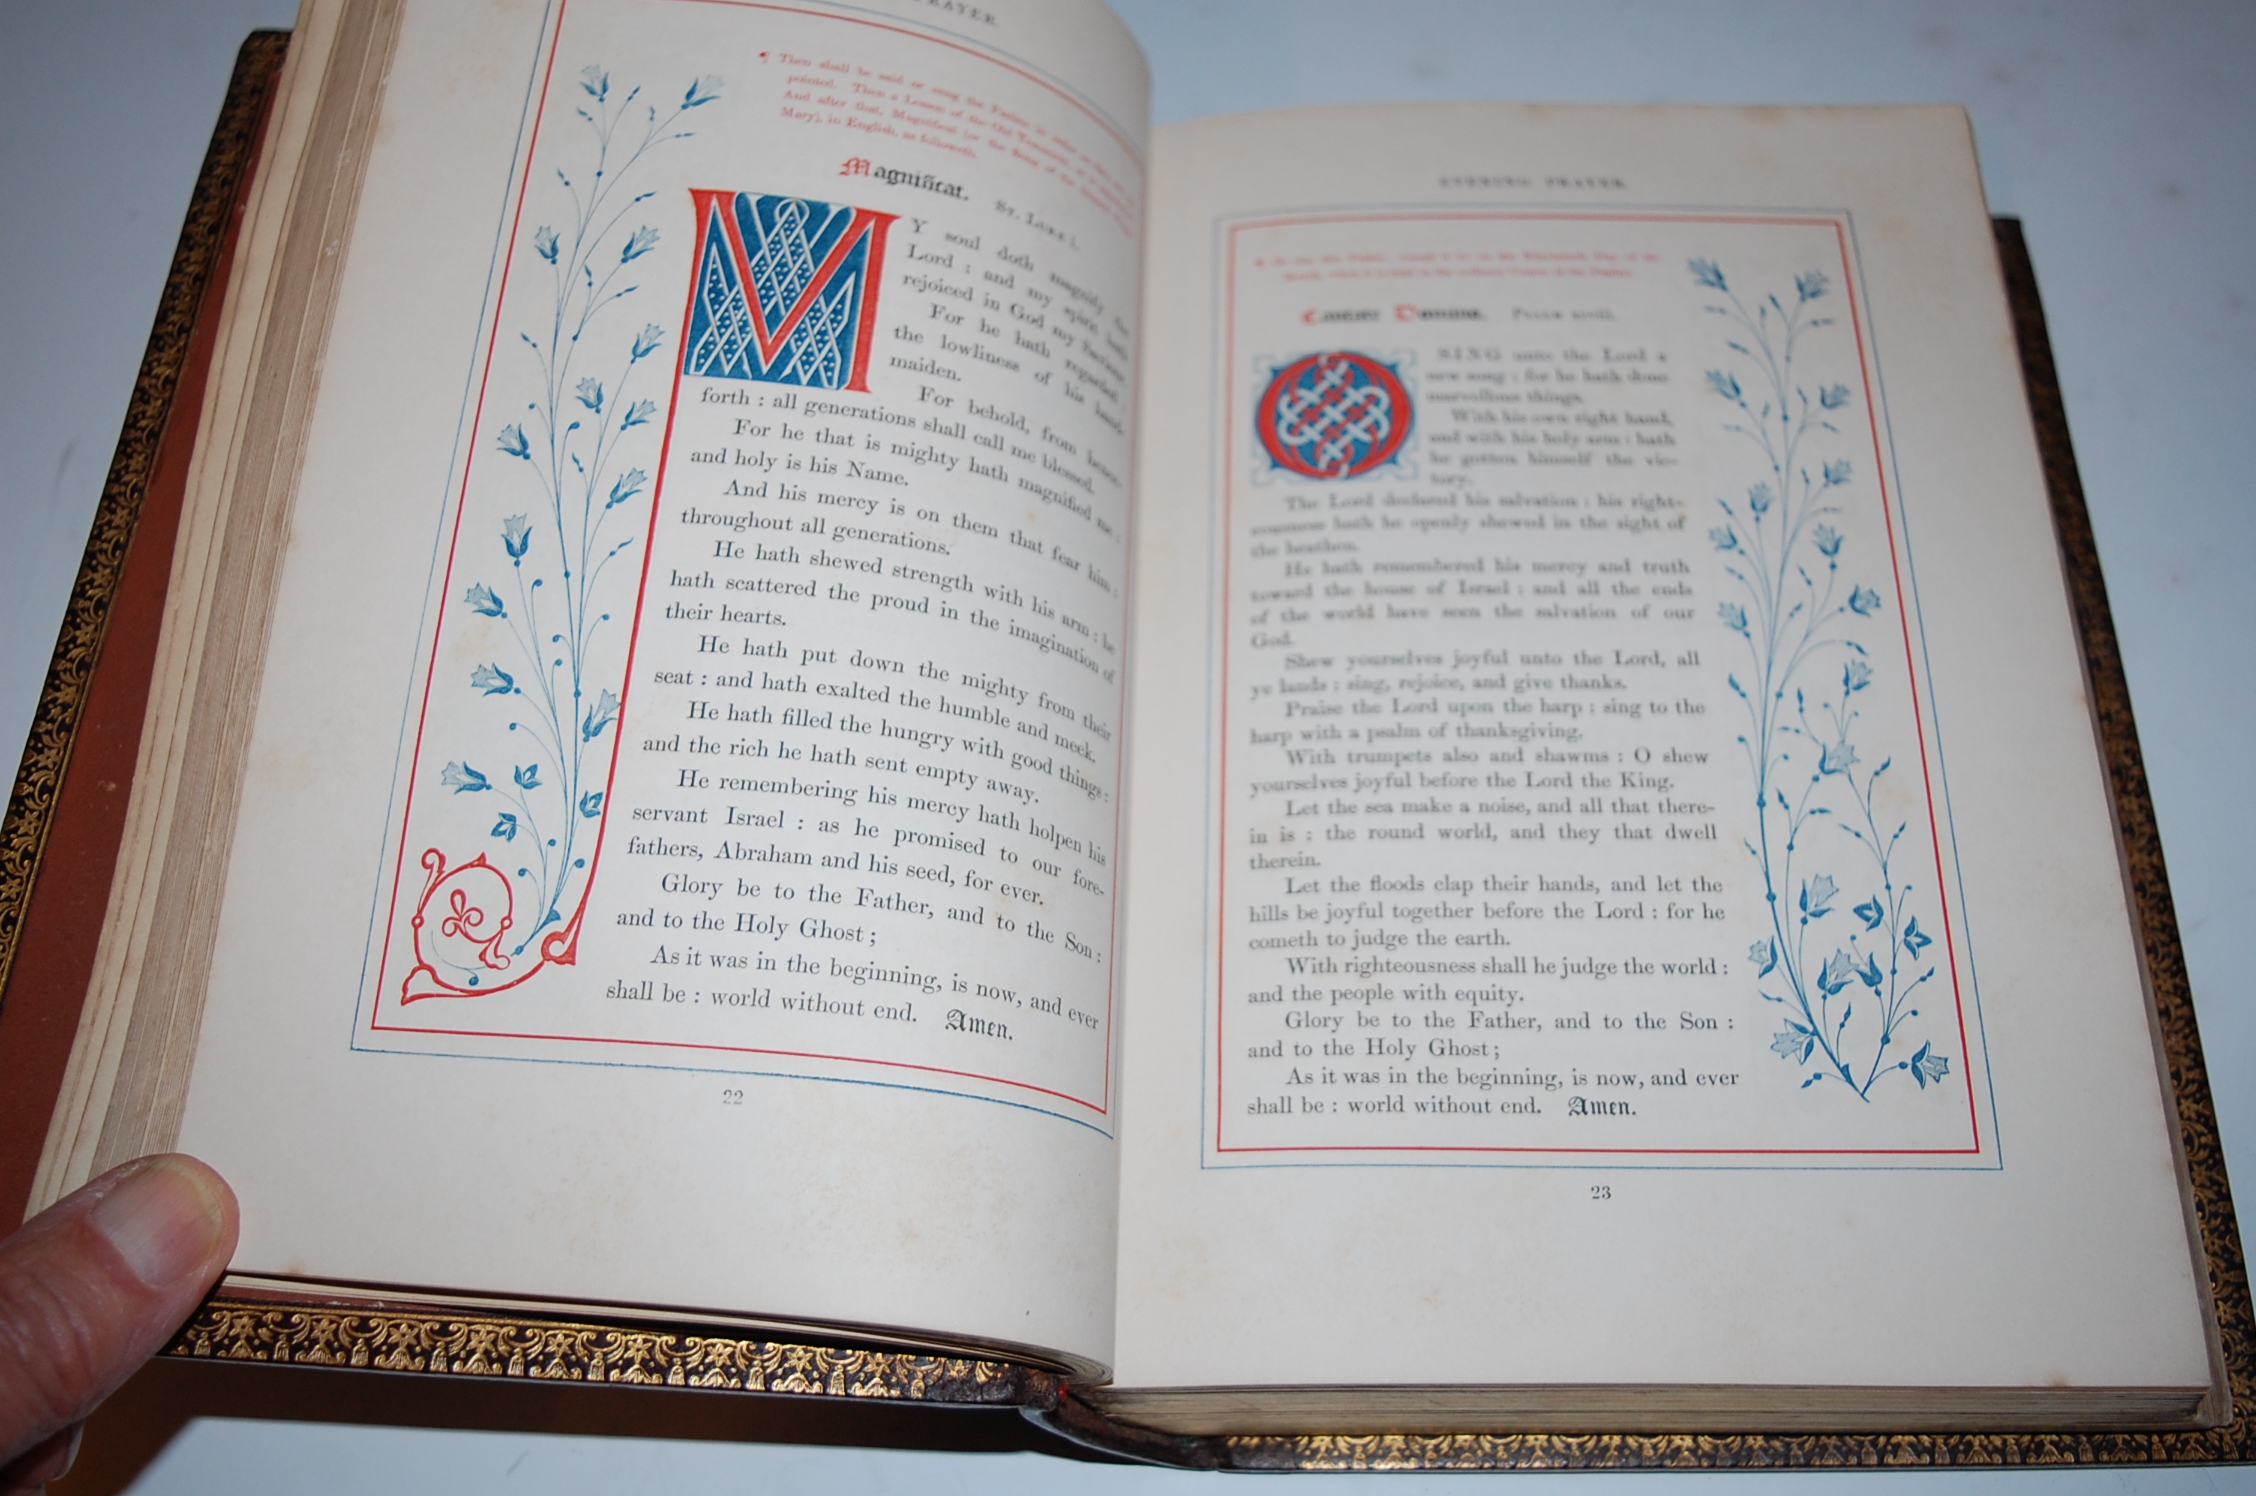 Book of Common Prayer, London, John Murray 1845, large 8vo, full embossed decorative leather, - Image 5 of 6